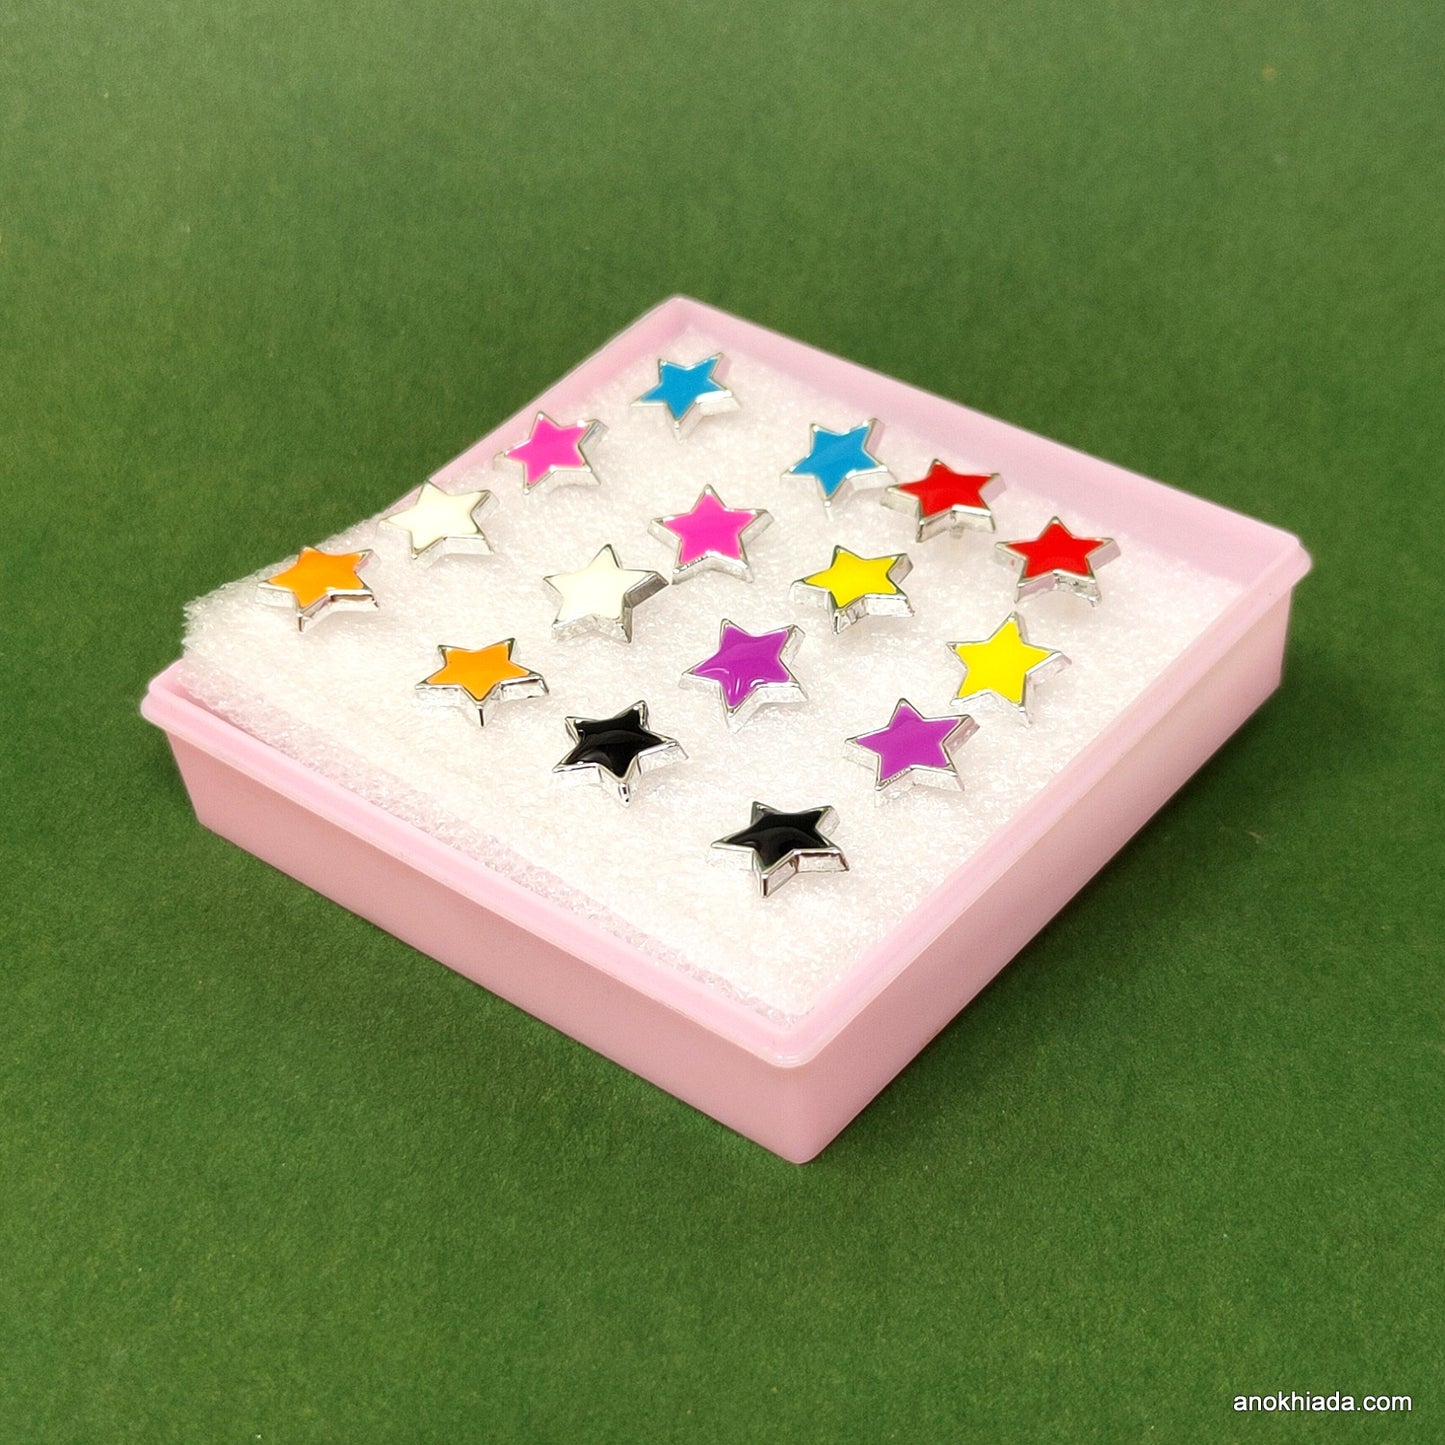 Anokhi Ada Plastic Star Stud Earrings for Girls and Women (Multi-Colour, Pack of 8 Pairs)-AR-01-a